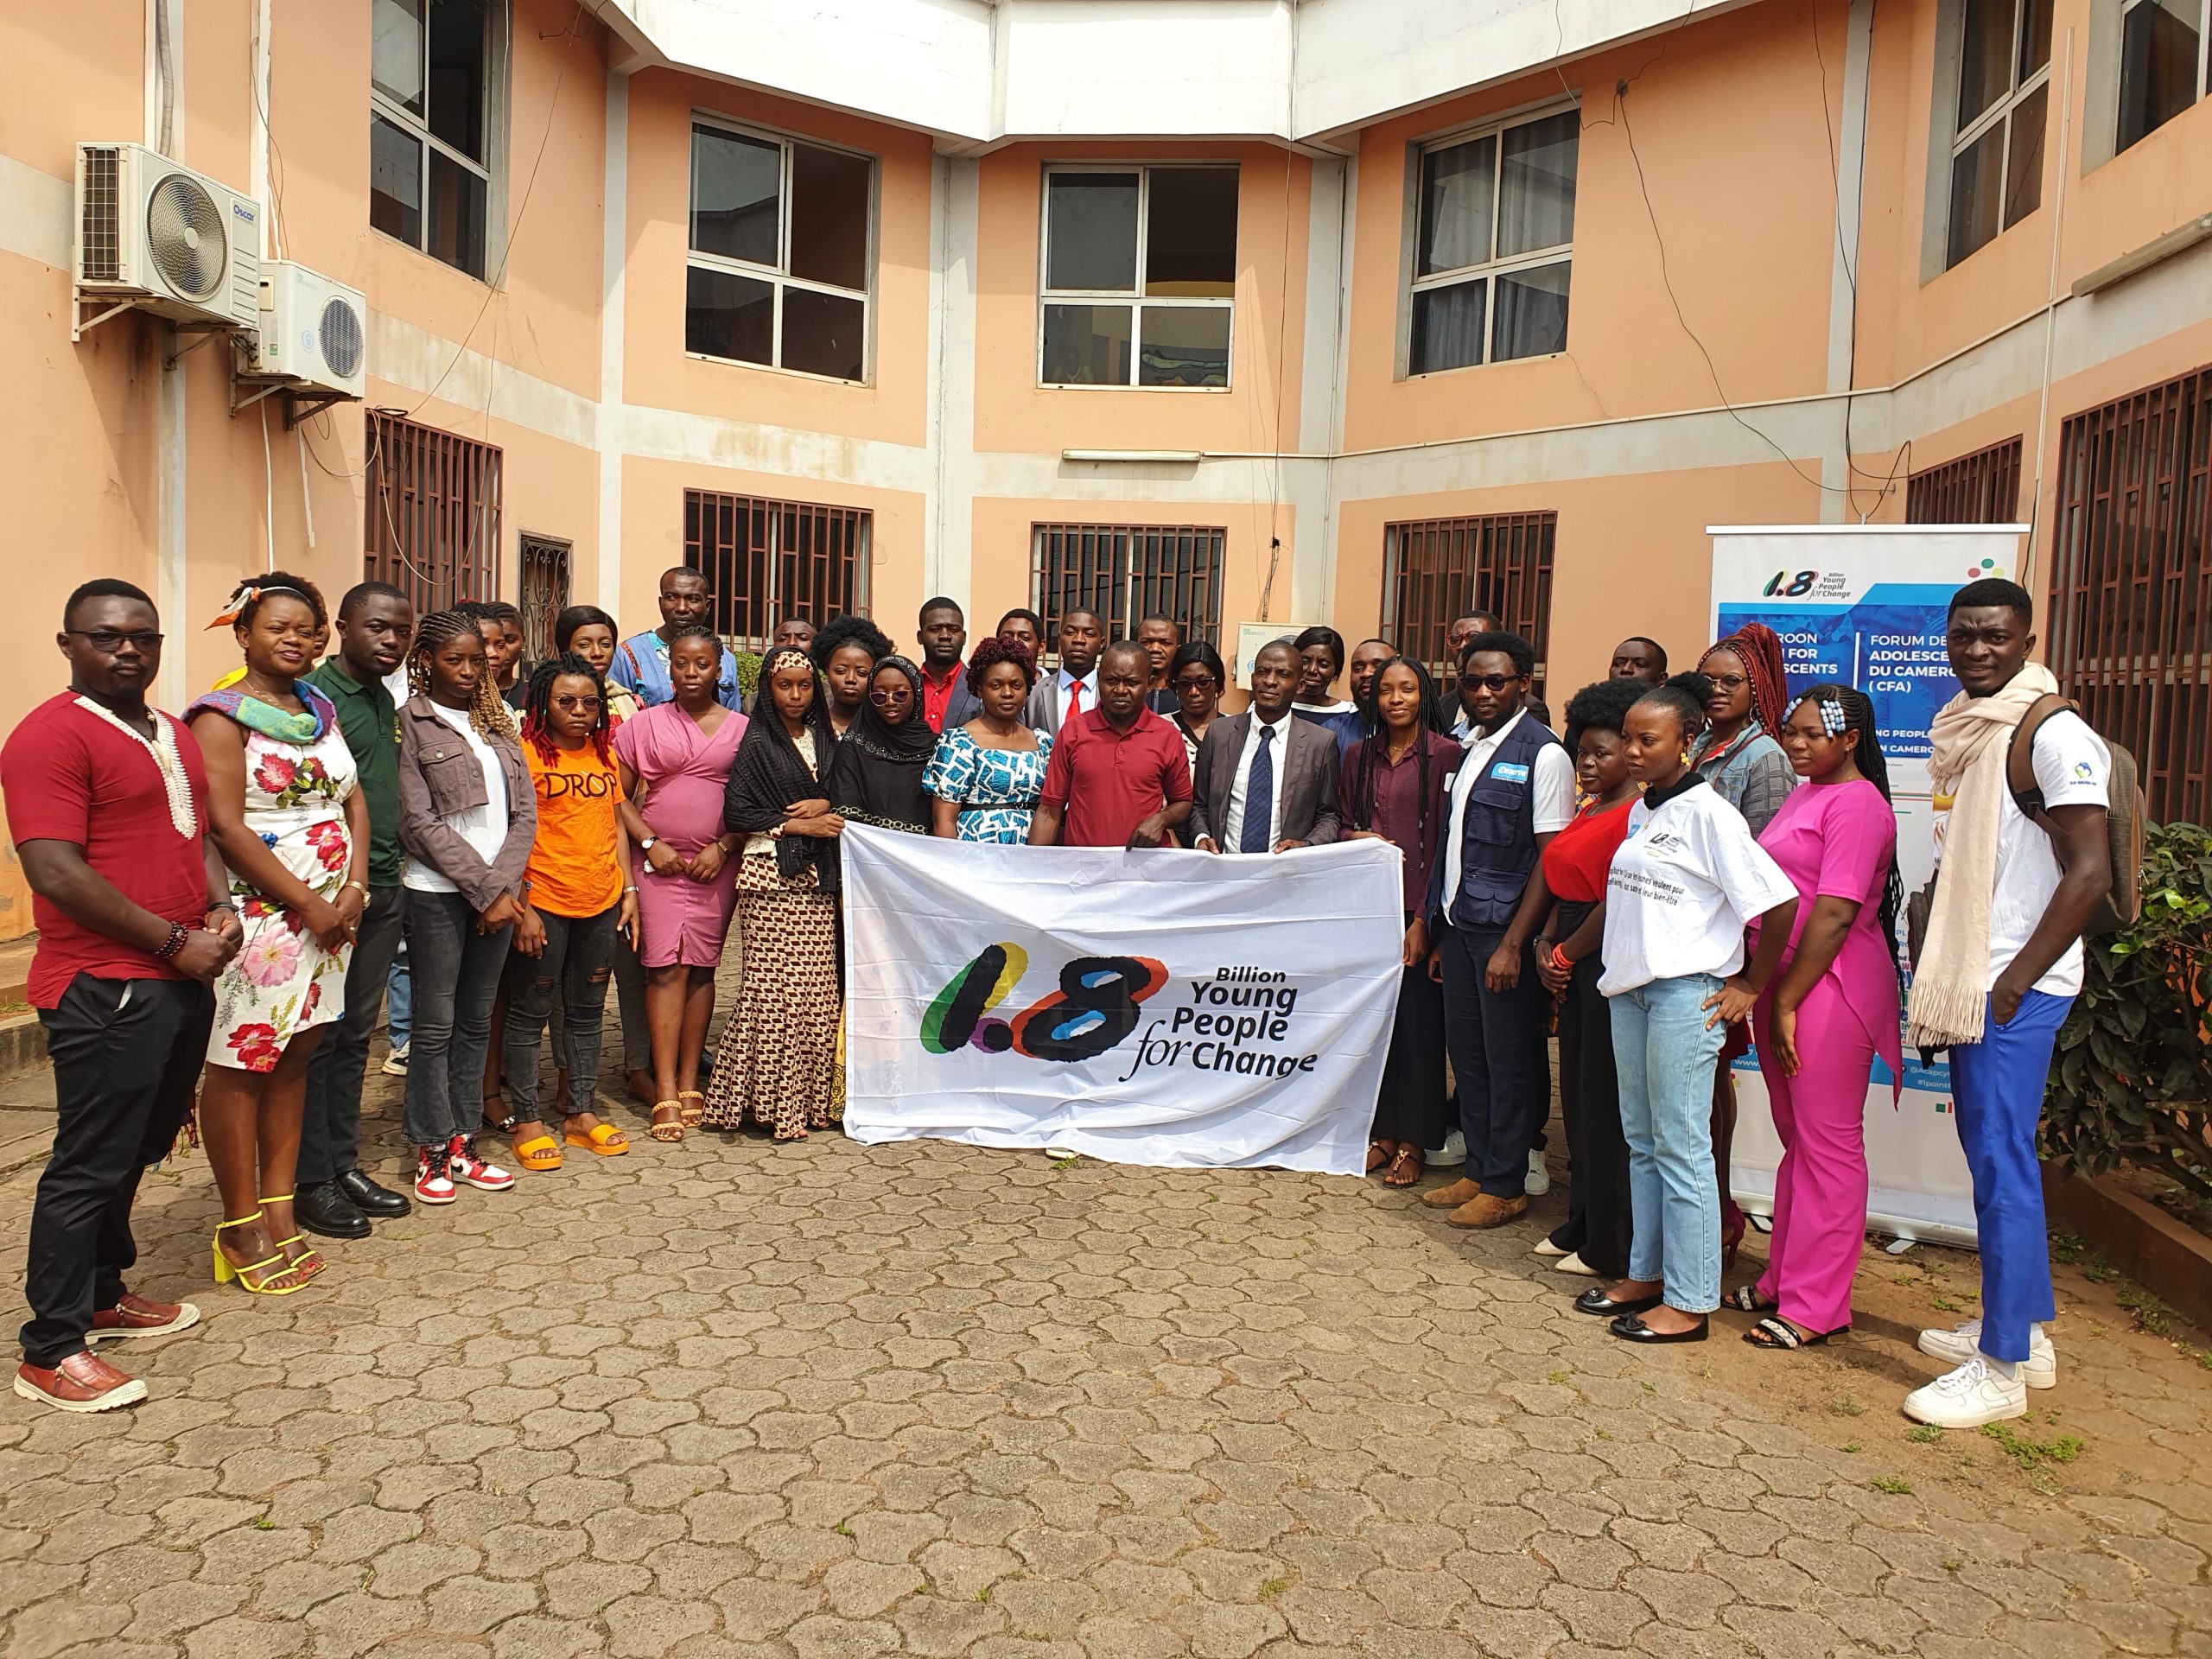 News on the Second National Training on Adolescent Health and Well-being